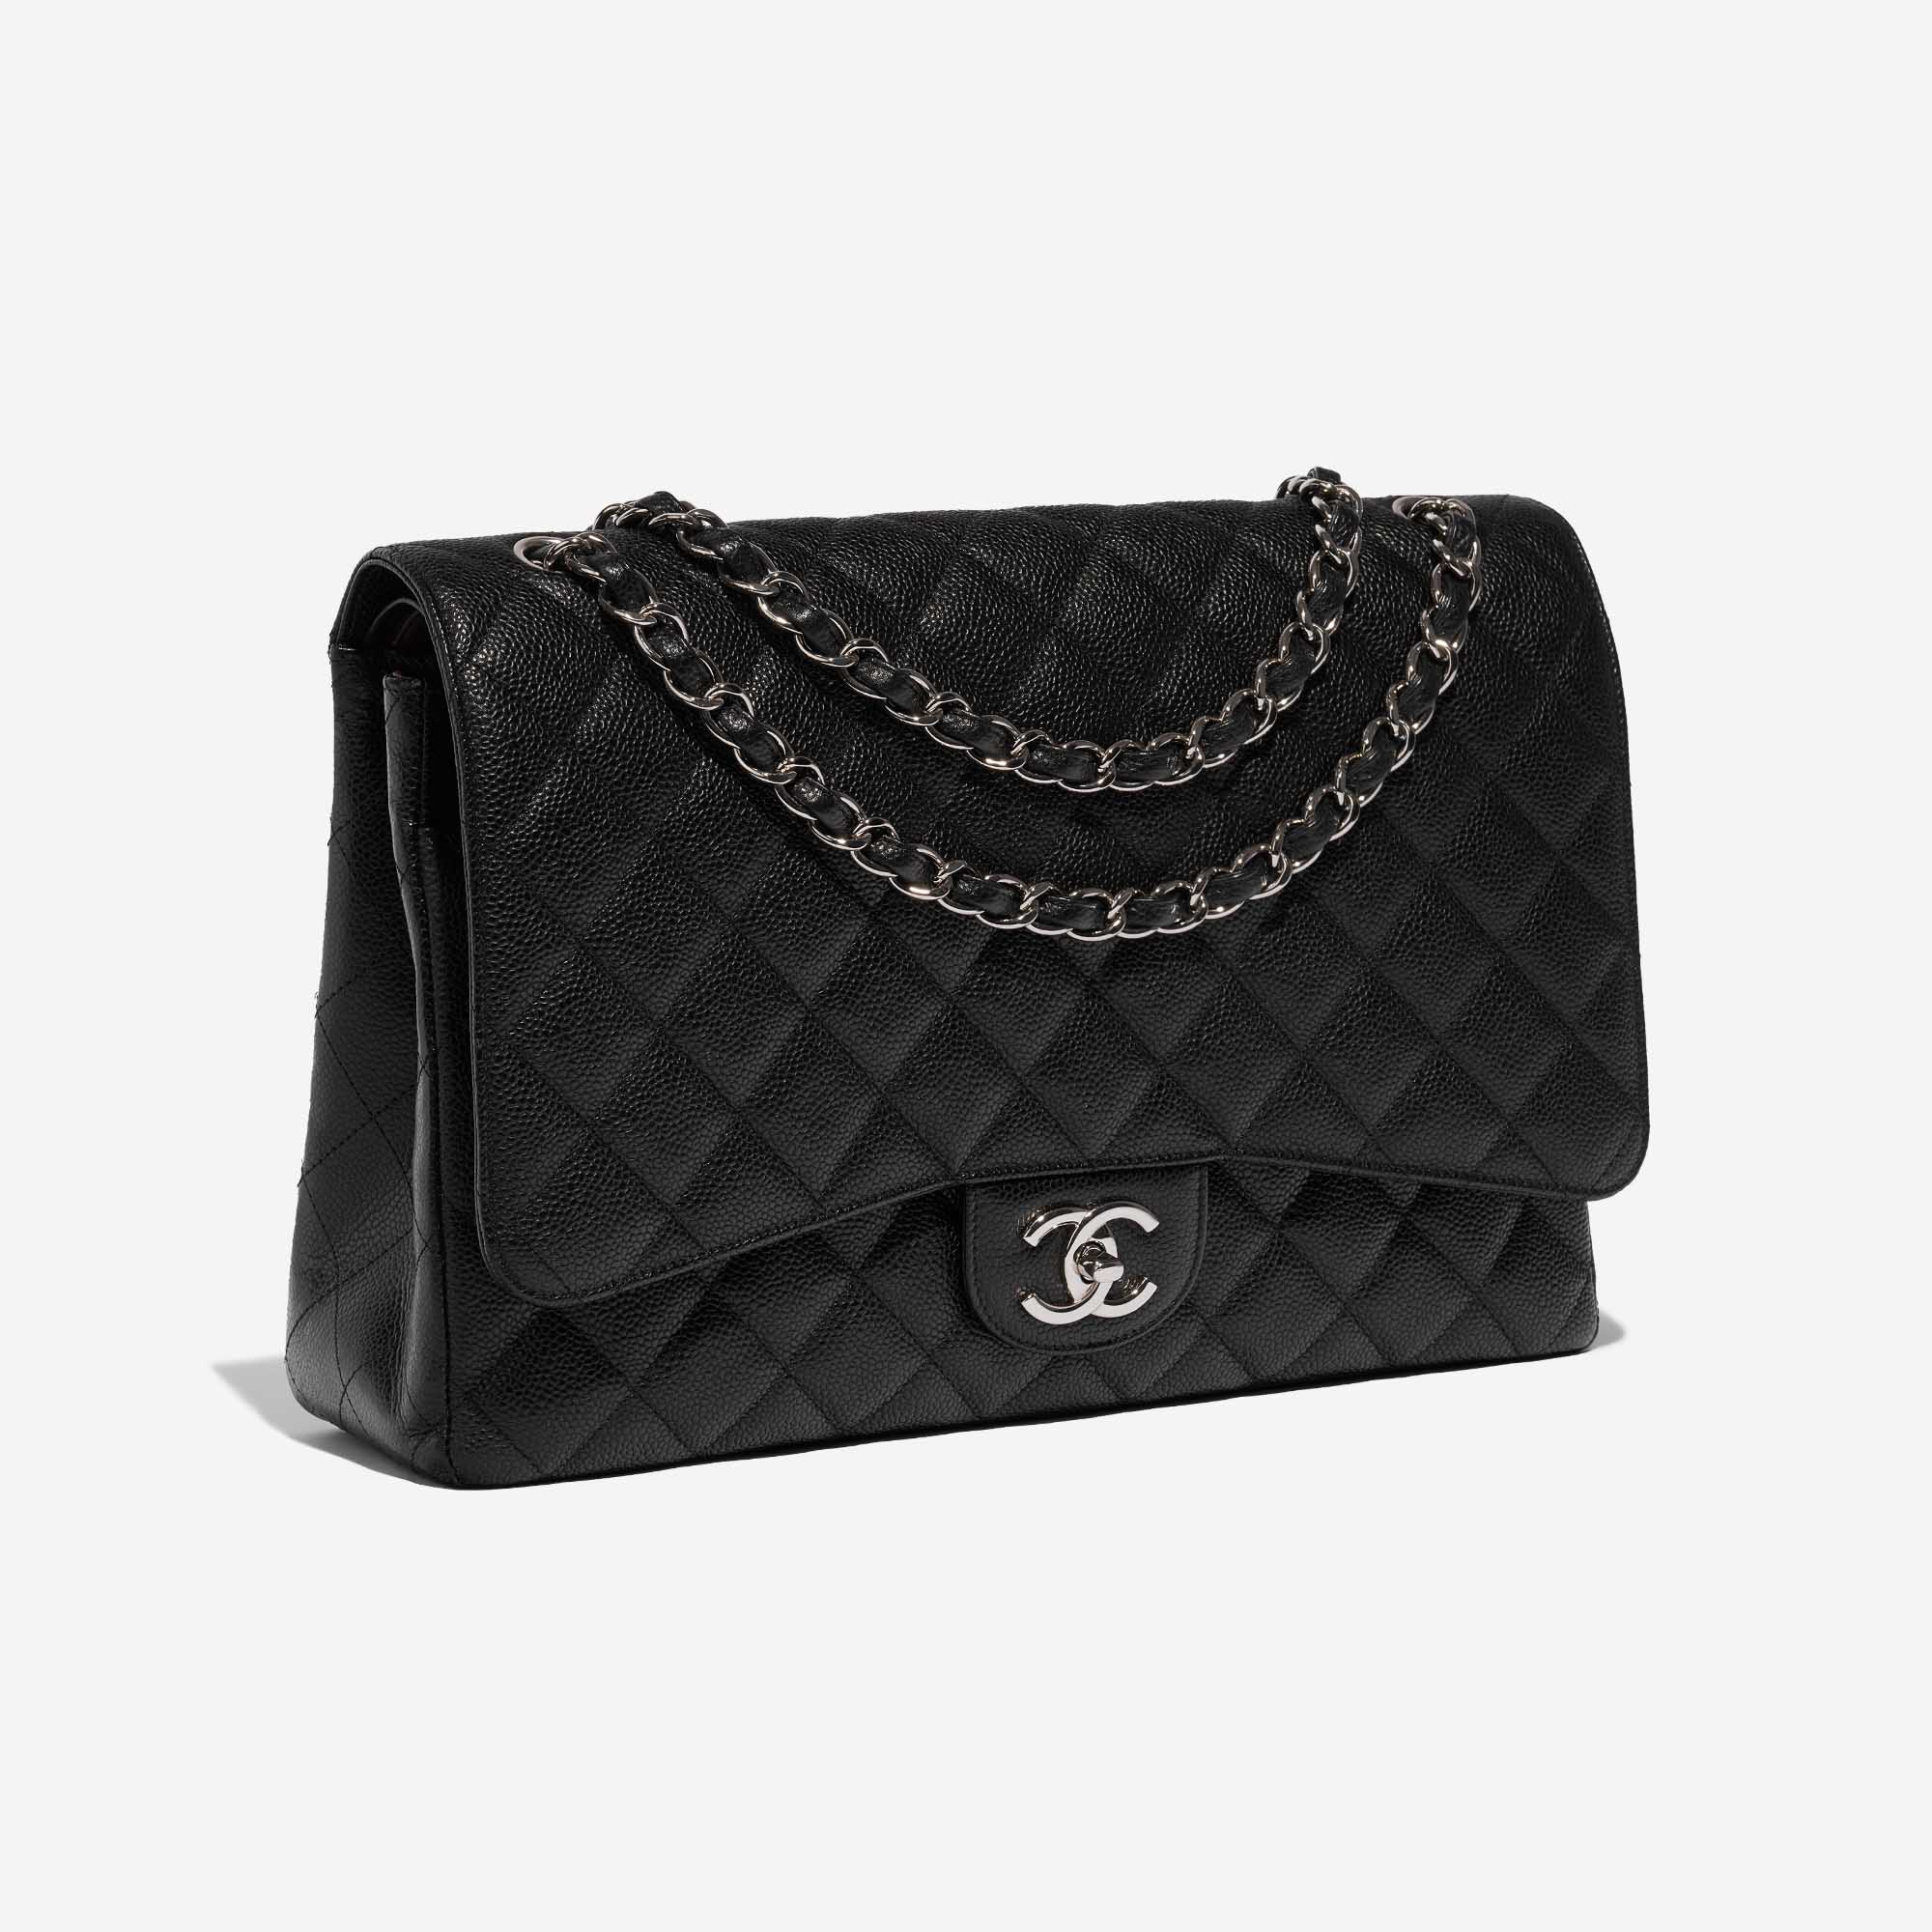 Pre-owned Chanel bag Timeless Maxi Caviar Black Black Side Front | Sell your designer bag on Saclab.com